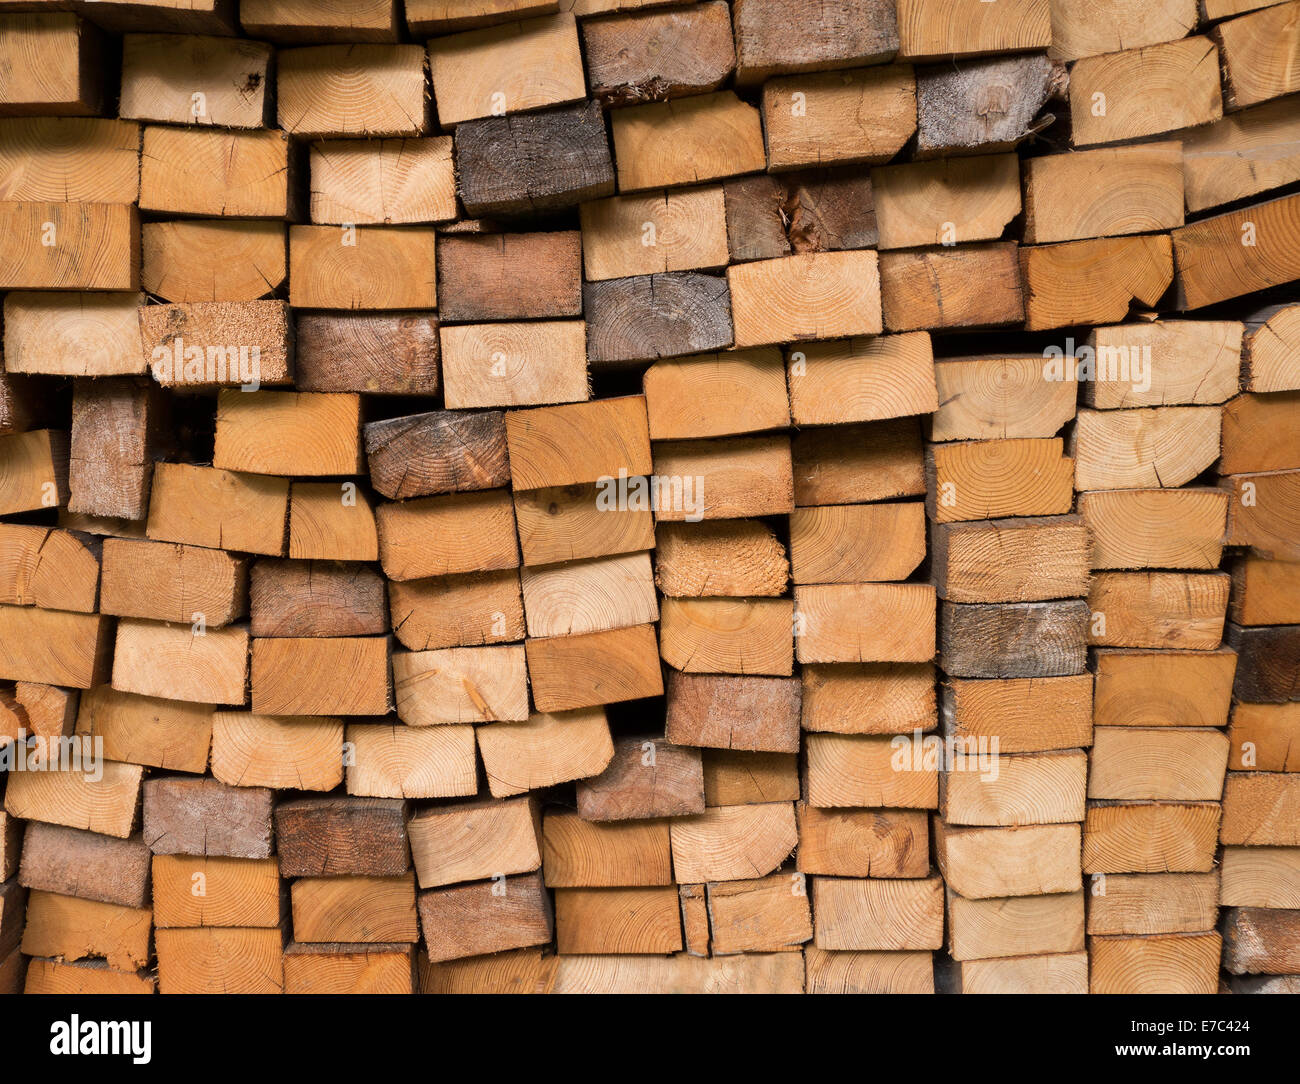 Thick piled boards Stock Photo